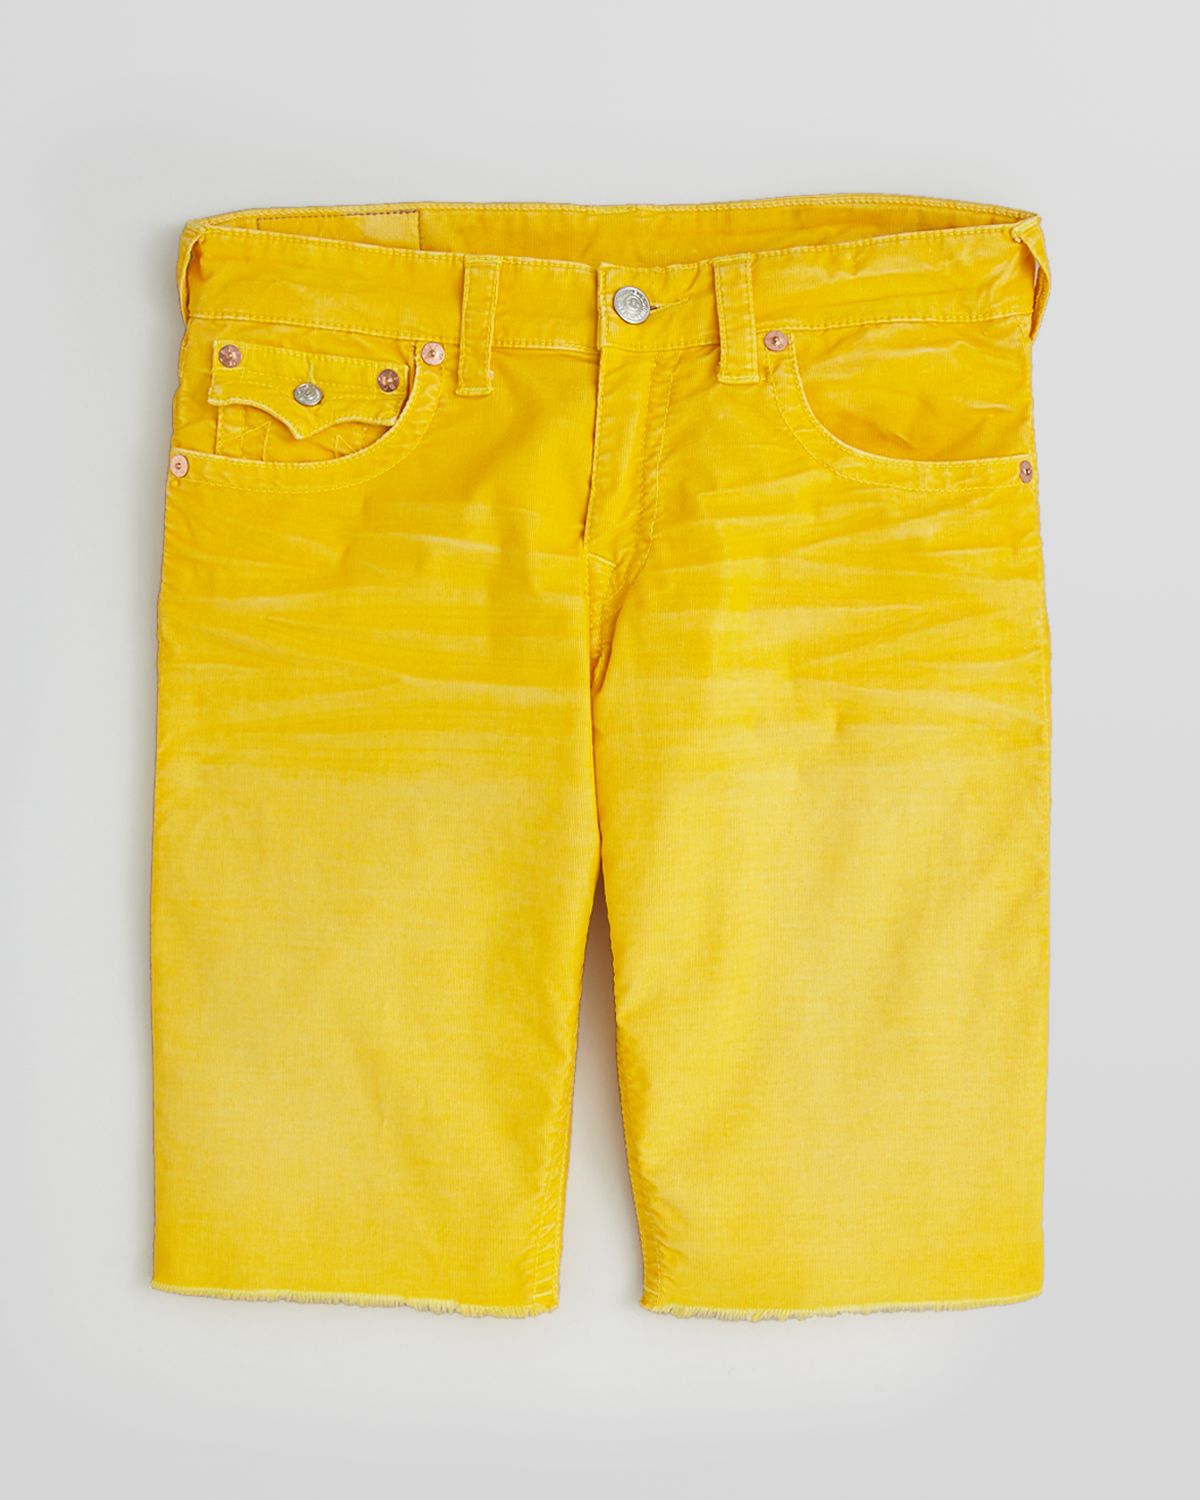 Lyst - True Religion Ricky Cord Cutoff Shorts in Yellow for Men